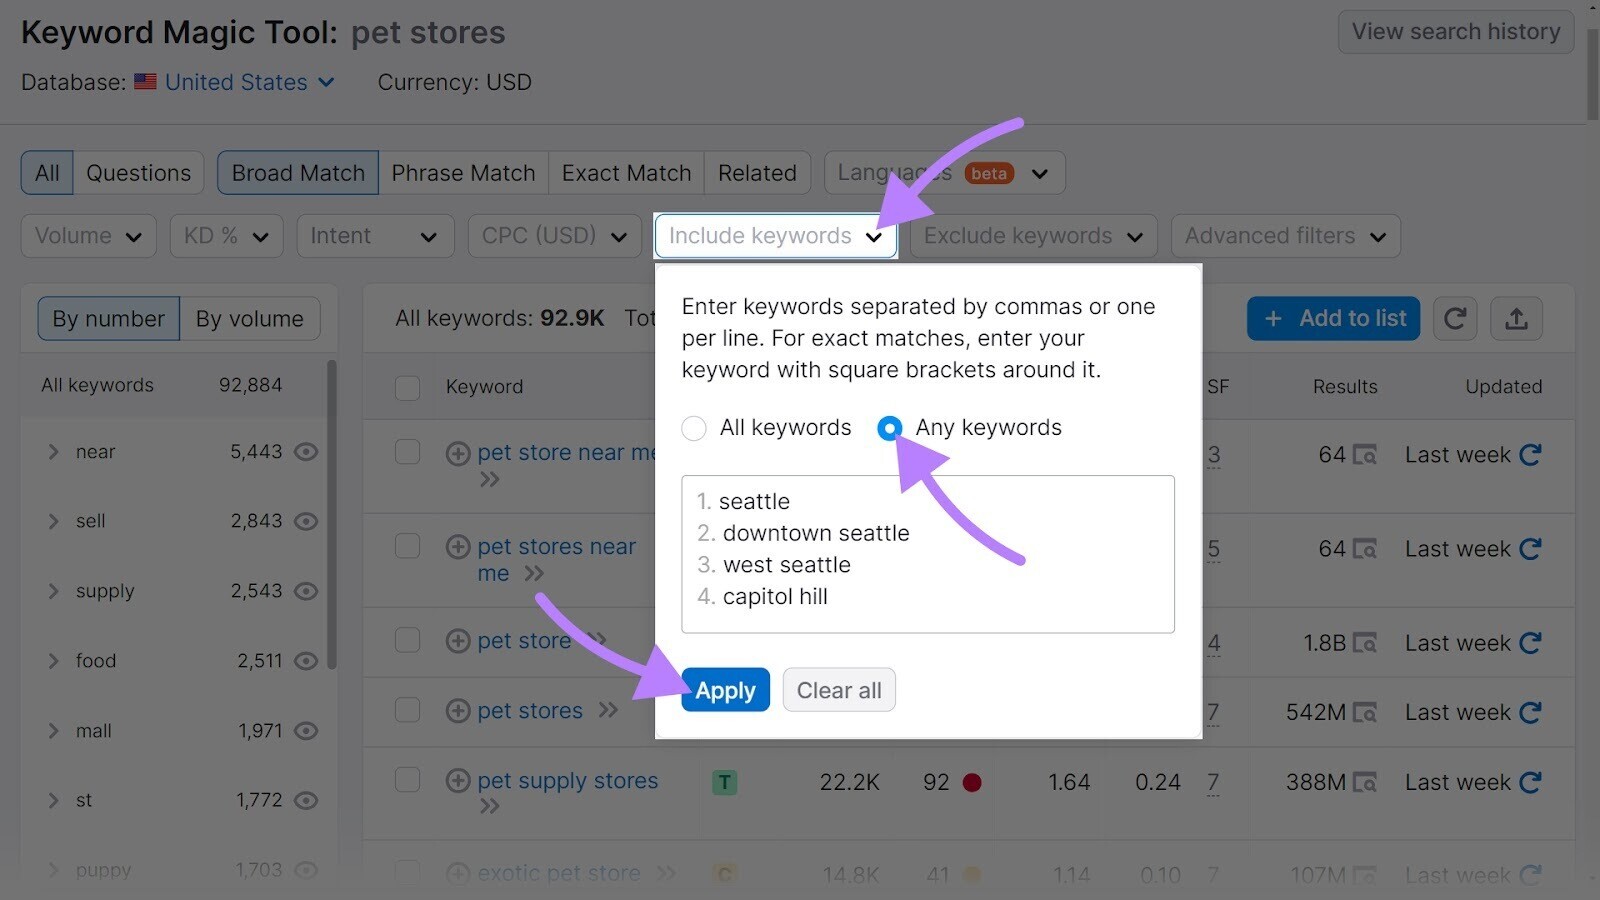 applying the “Include Keywords” filter in Keyword Magic Tool results